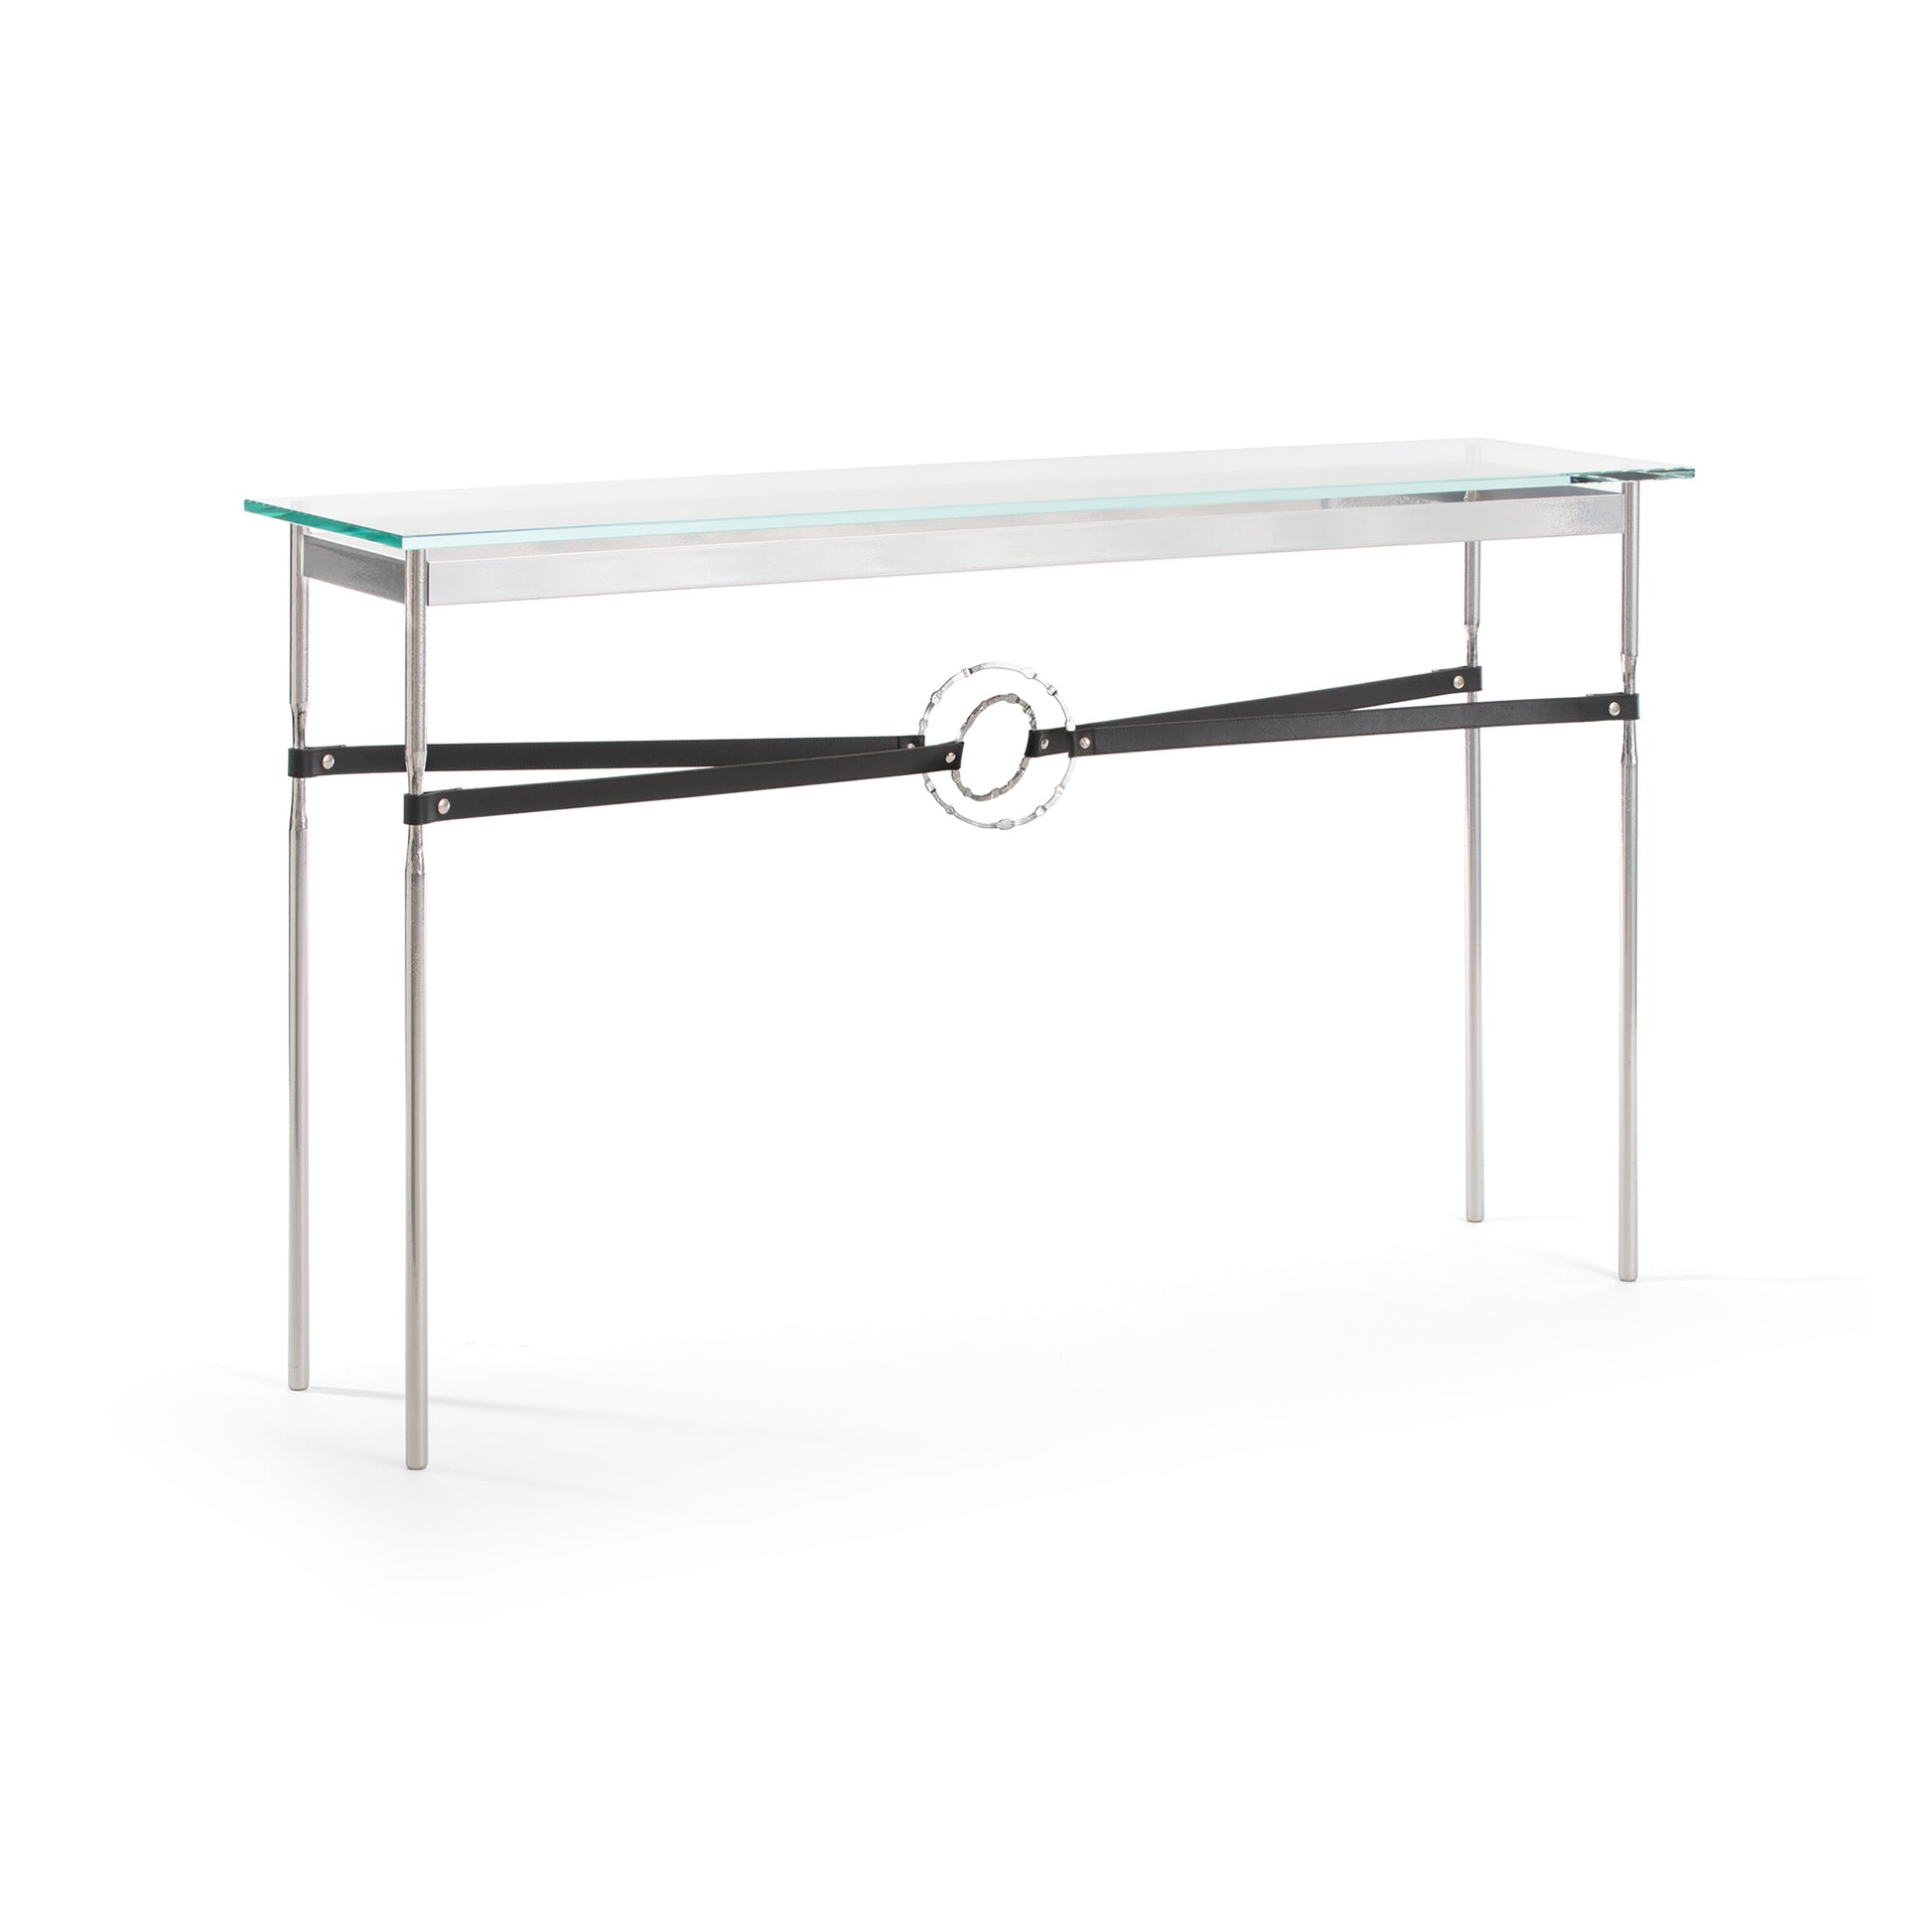 An Equus Console Table with a tempered glass top and metal legs by Hubbardton Forge.